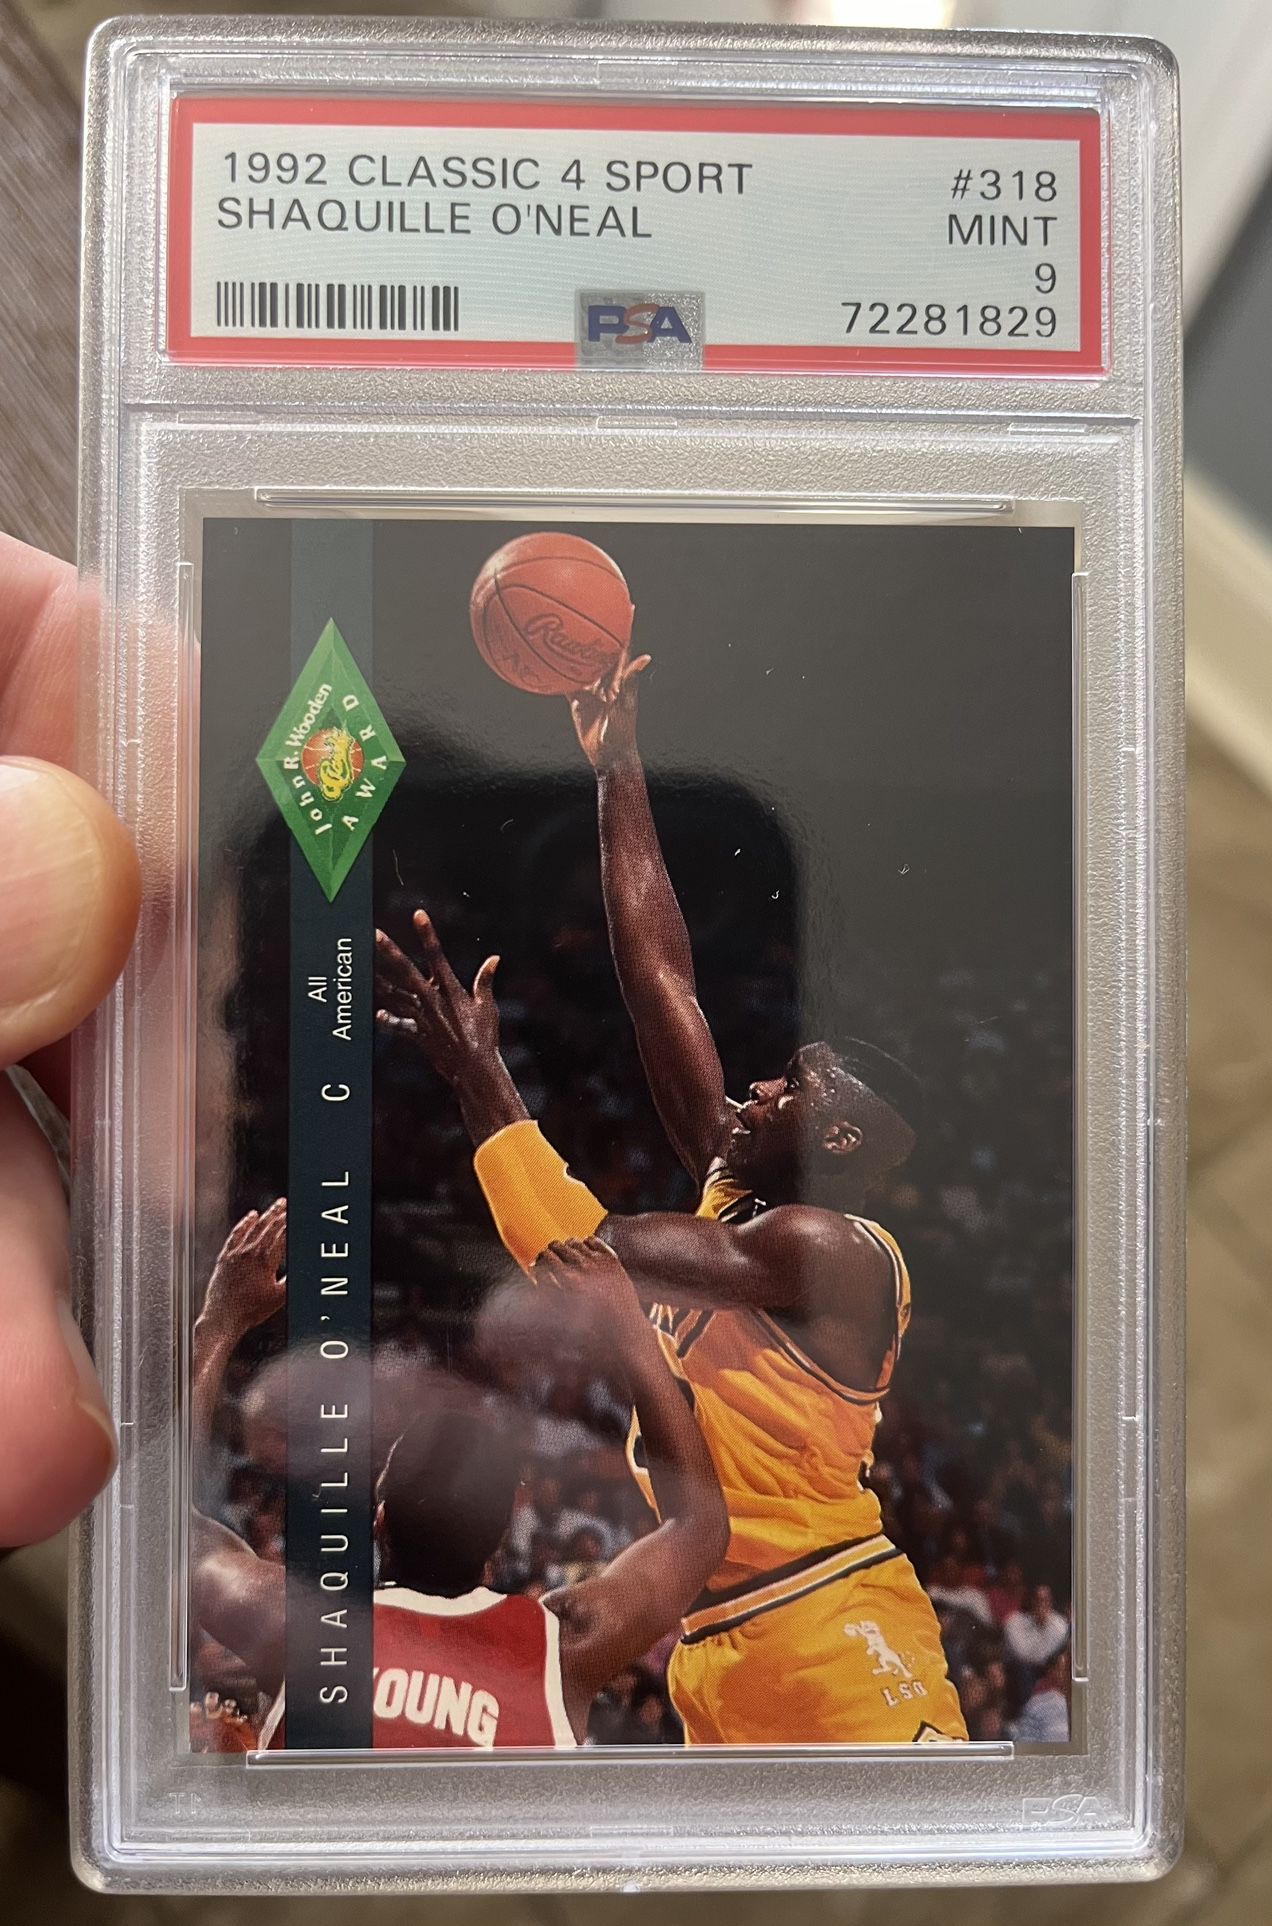 Shaquille ONeal Cards / Kobe Bryant / Steve Young..Great price !!  